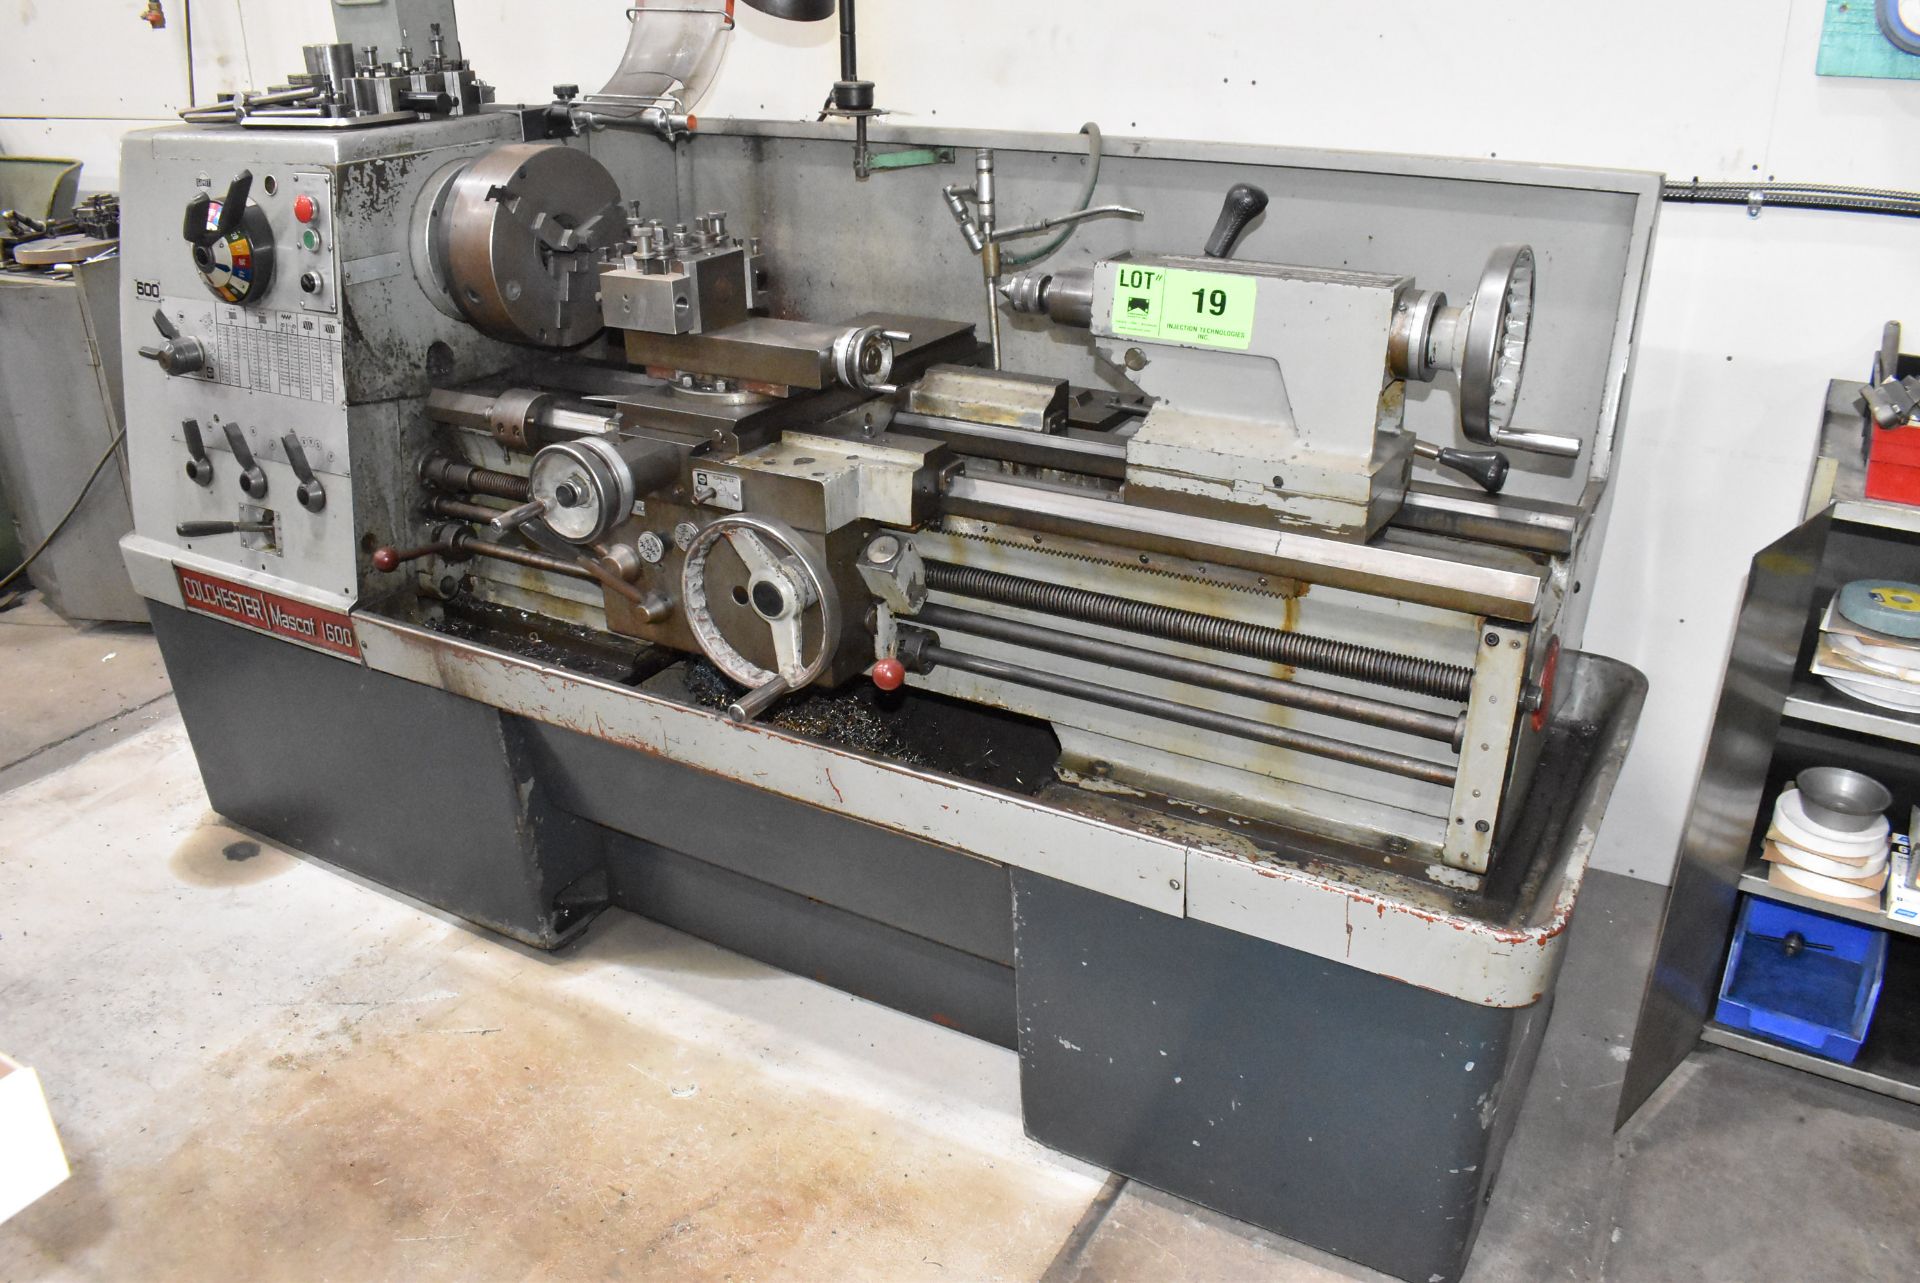 COLCHESTER MASCOT 1600 GAP BED ENGINE LATHE WITH 17" SWING, 40" BETWEEN CENTERS, SPEEDS TO 1,600